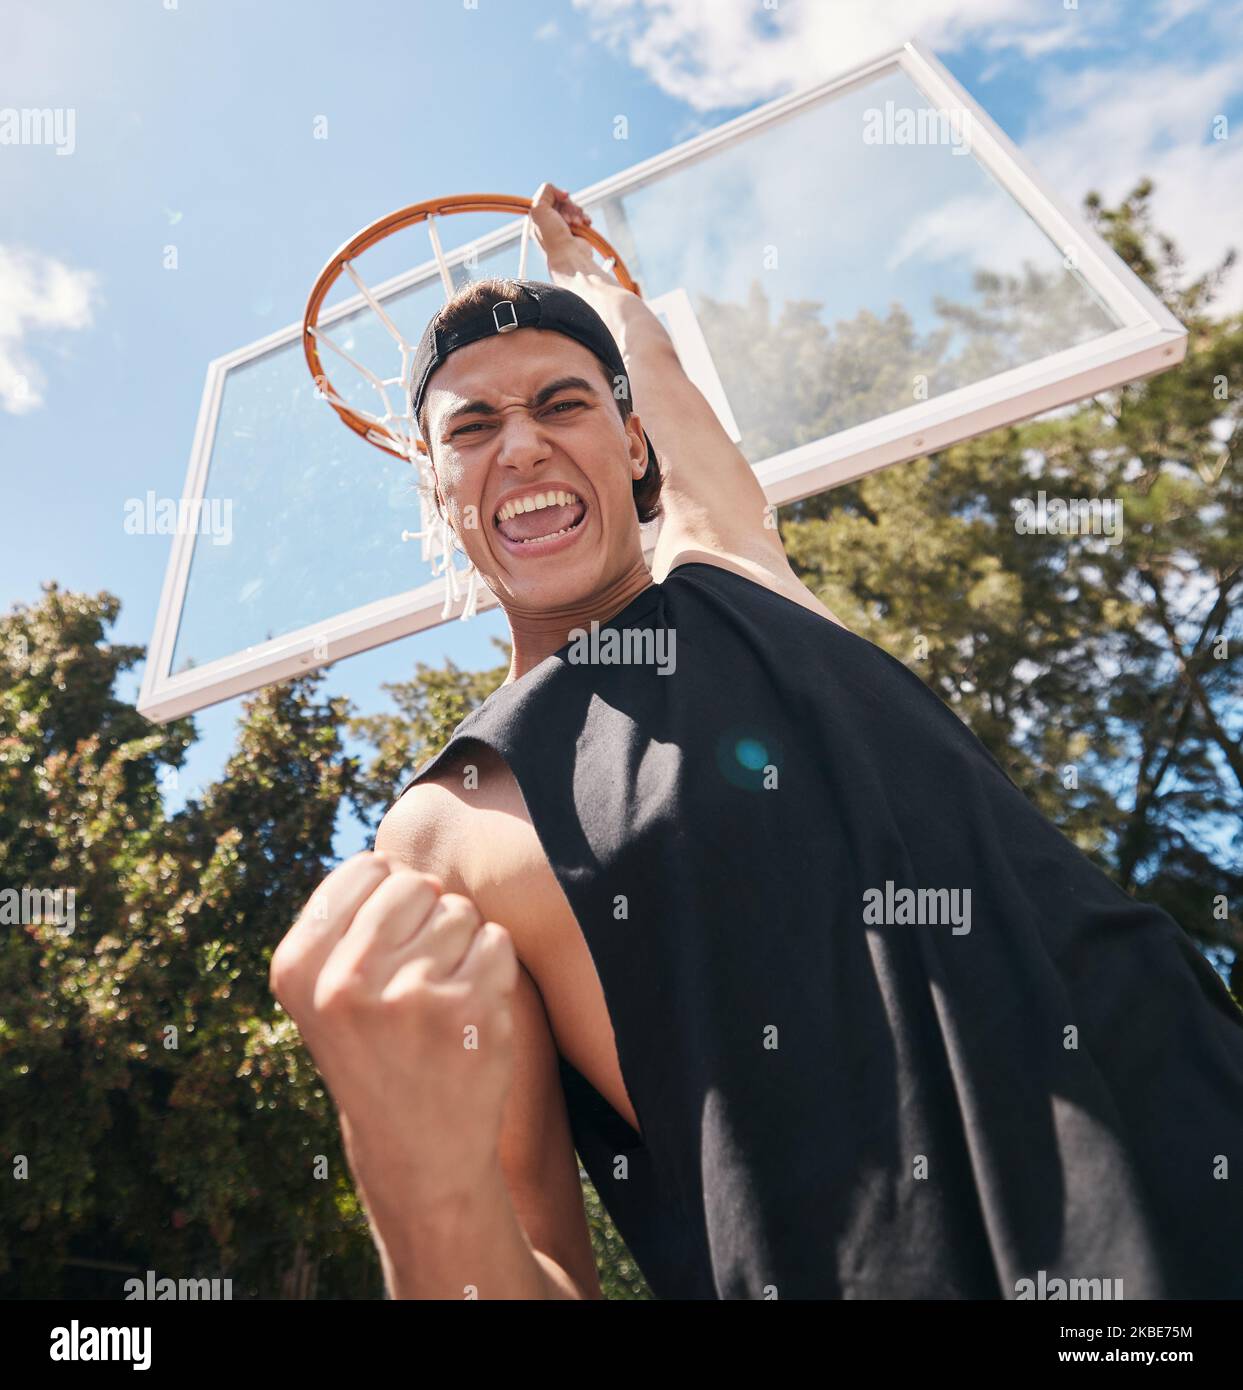 Basketball, man and winner in score for sports game, celebration or match in the court outdoors. Excited, energetic male basketball player celebrating Stock Photo